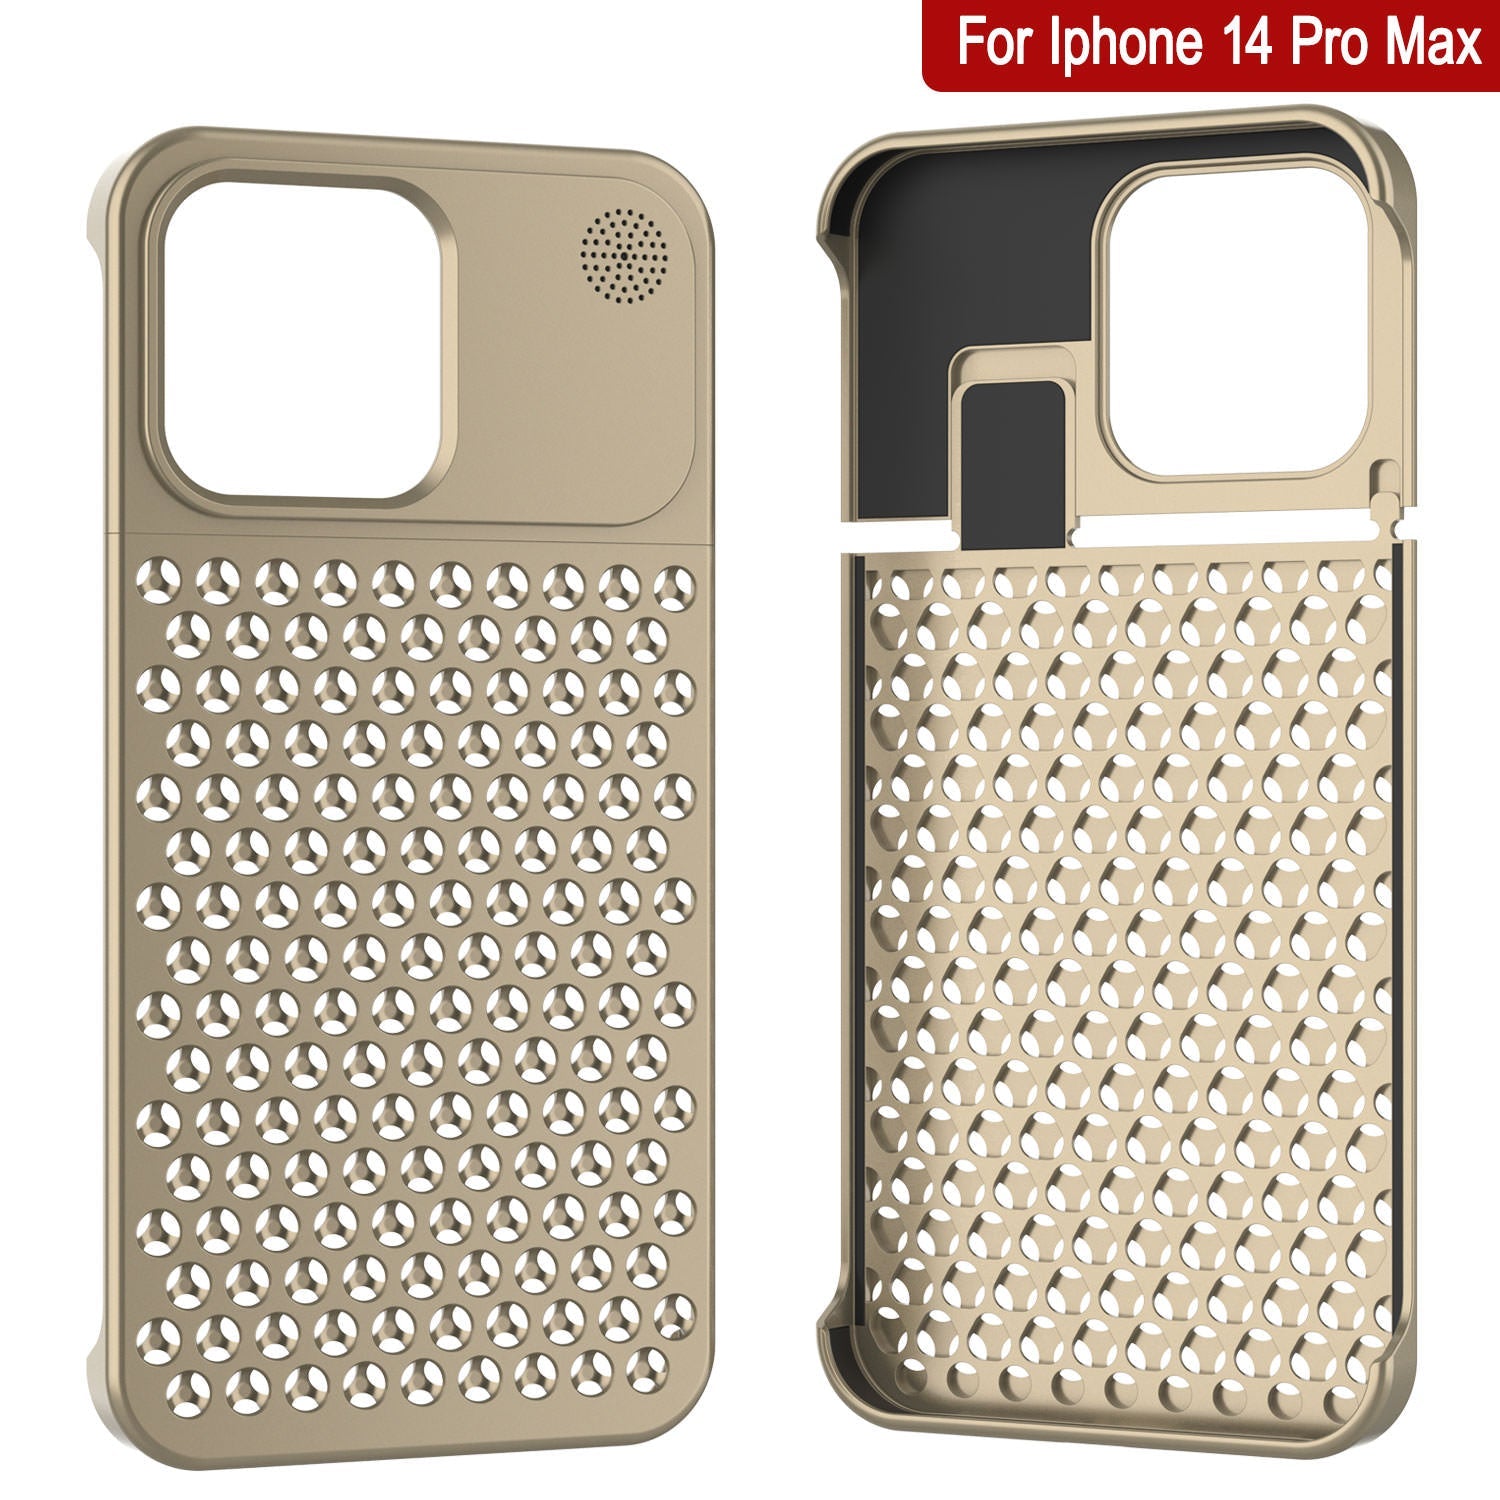 PunkCase for iPhone 14 Pro Max Aluminum Alloy Case [Fortifier Extreme Series] Ultra Durable Cover [Gold]